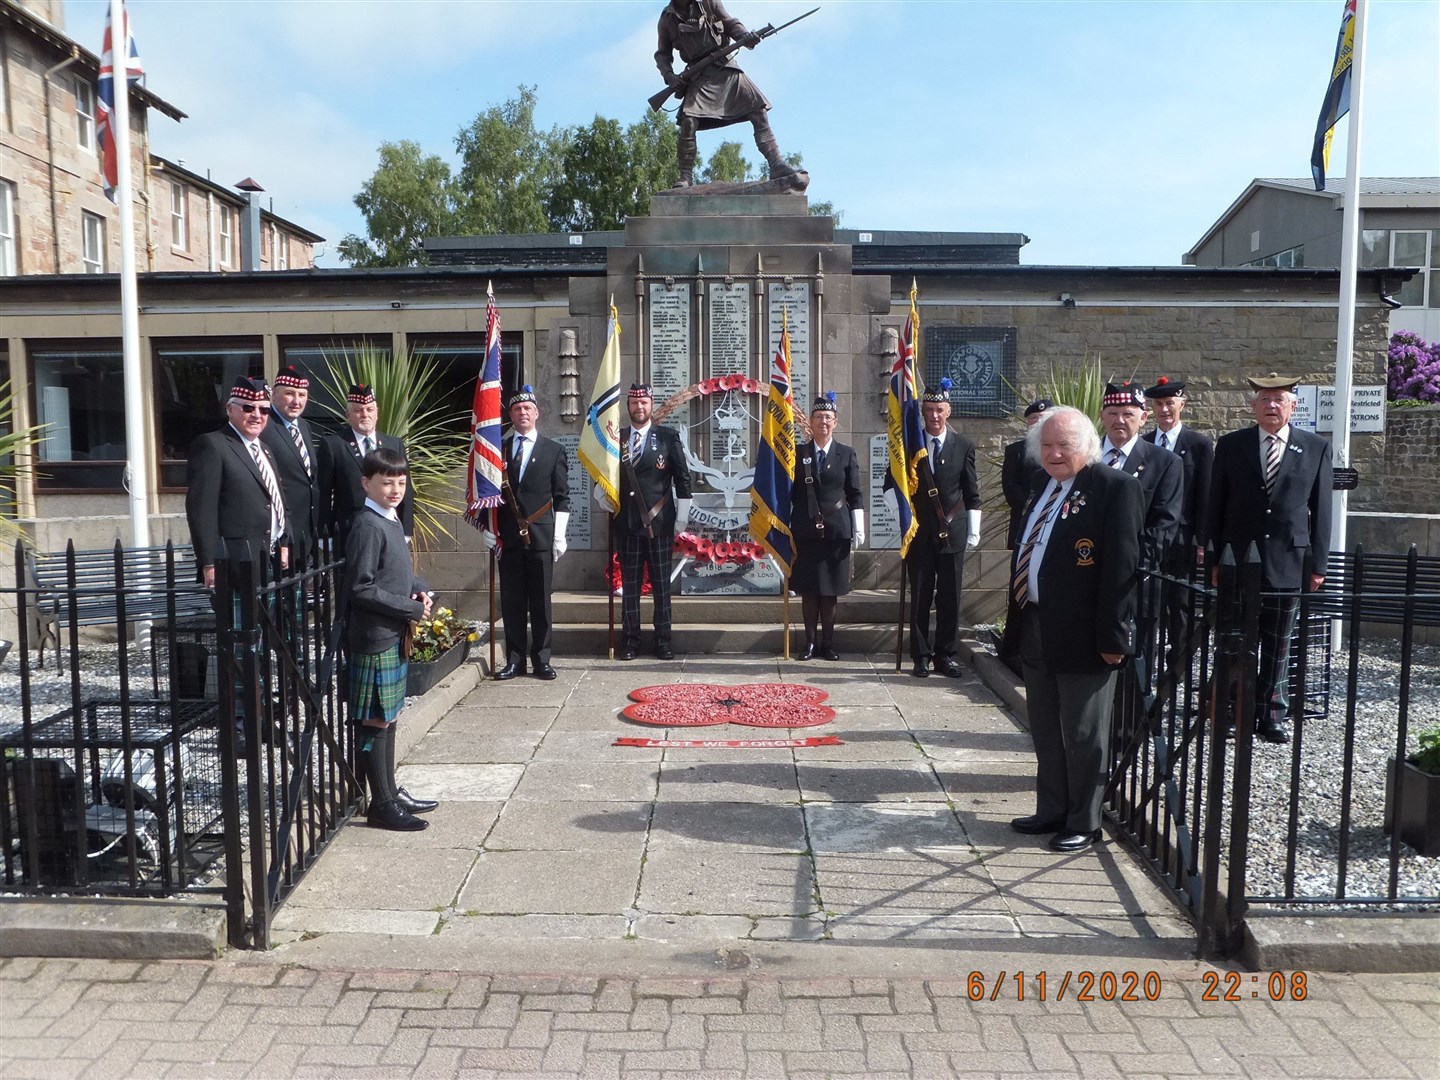 Members of the Seaforth Highlanders Regimental Association were amongst those paying tribute in Dingwall. Picture: Murdo Sutherland